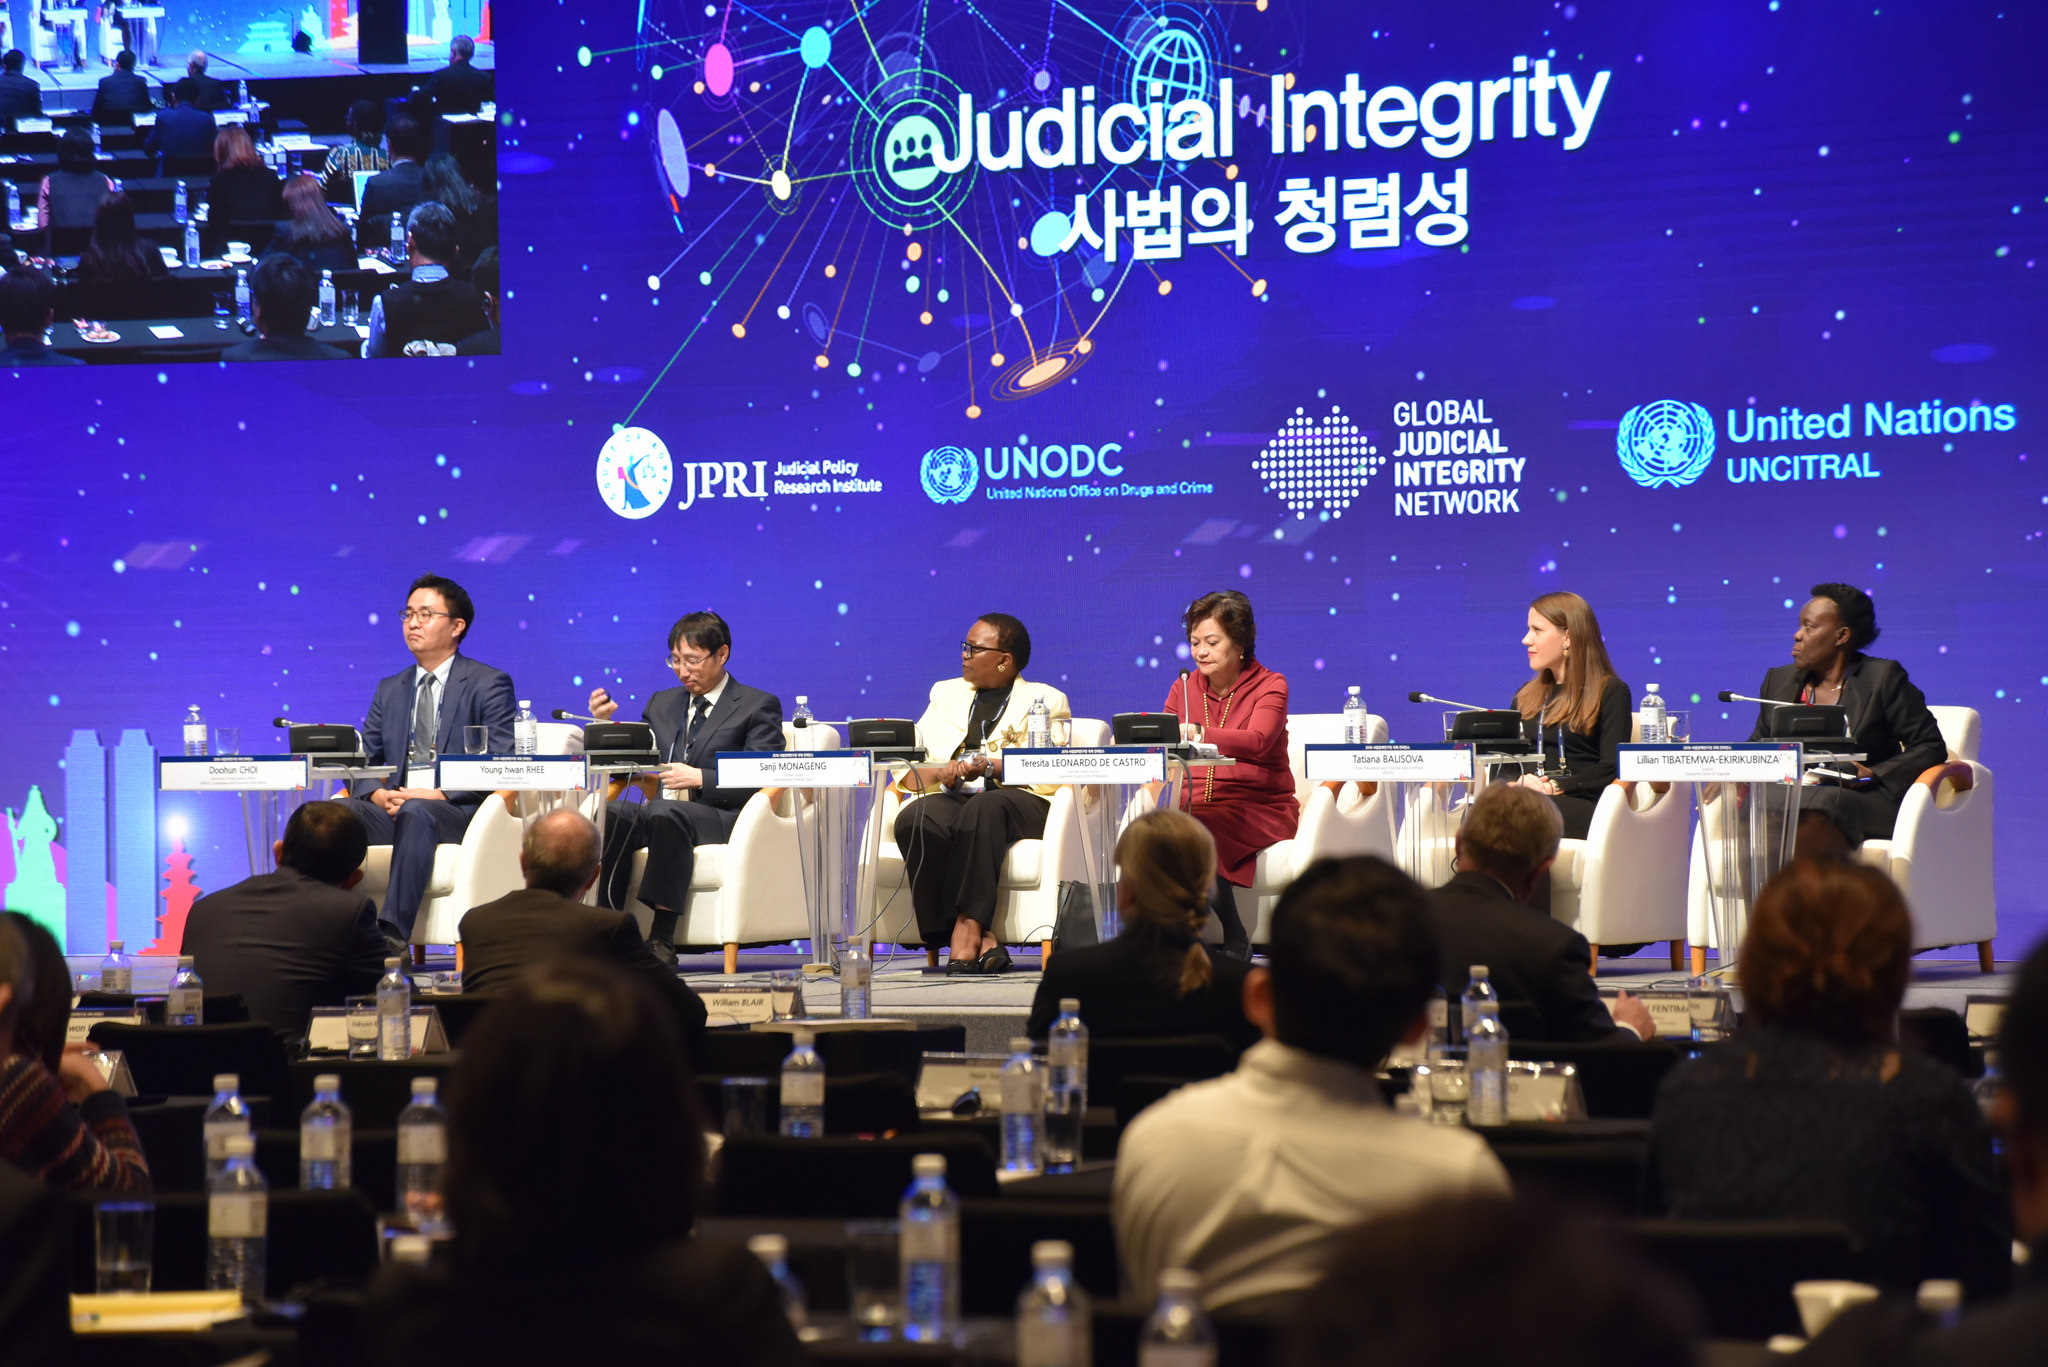 EGM: Gender-related Judicial Integrity Issues